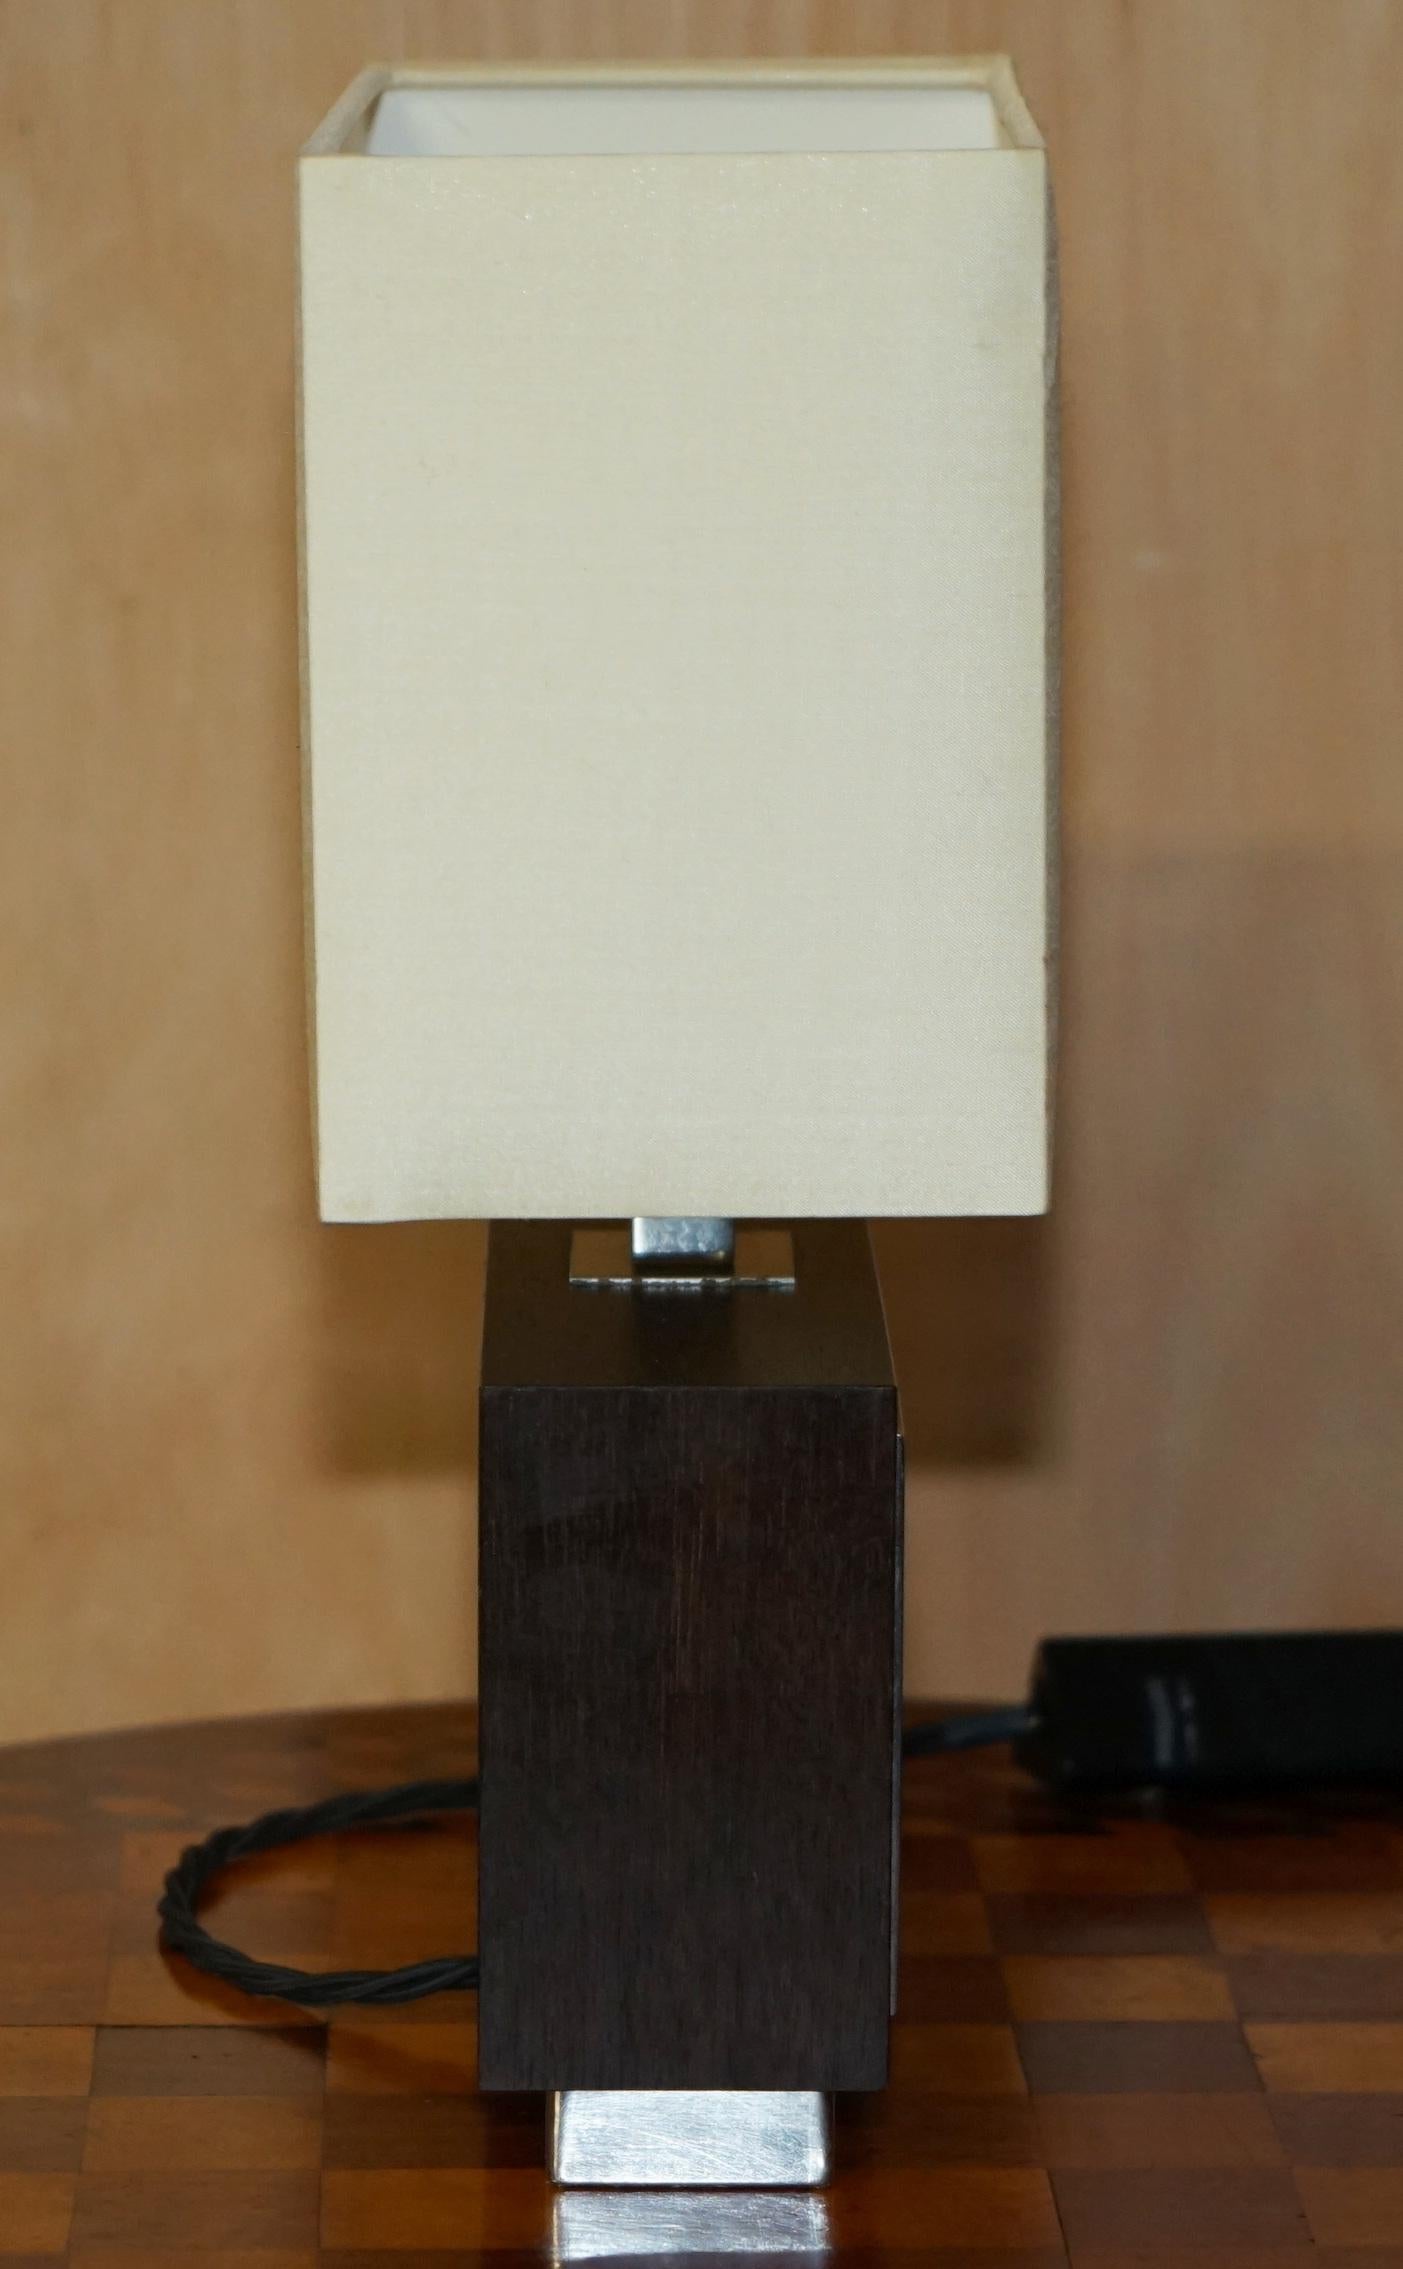 EXQUISITE PAIR OF DAVID LINLEY CHELSEA TABLE LAMPS WITH DIMMER SWITCHEs For Sale 2